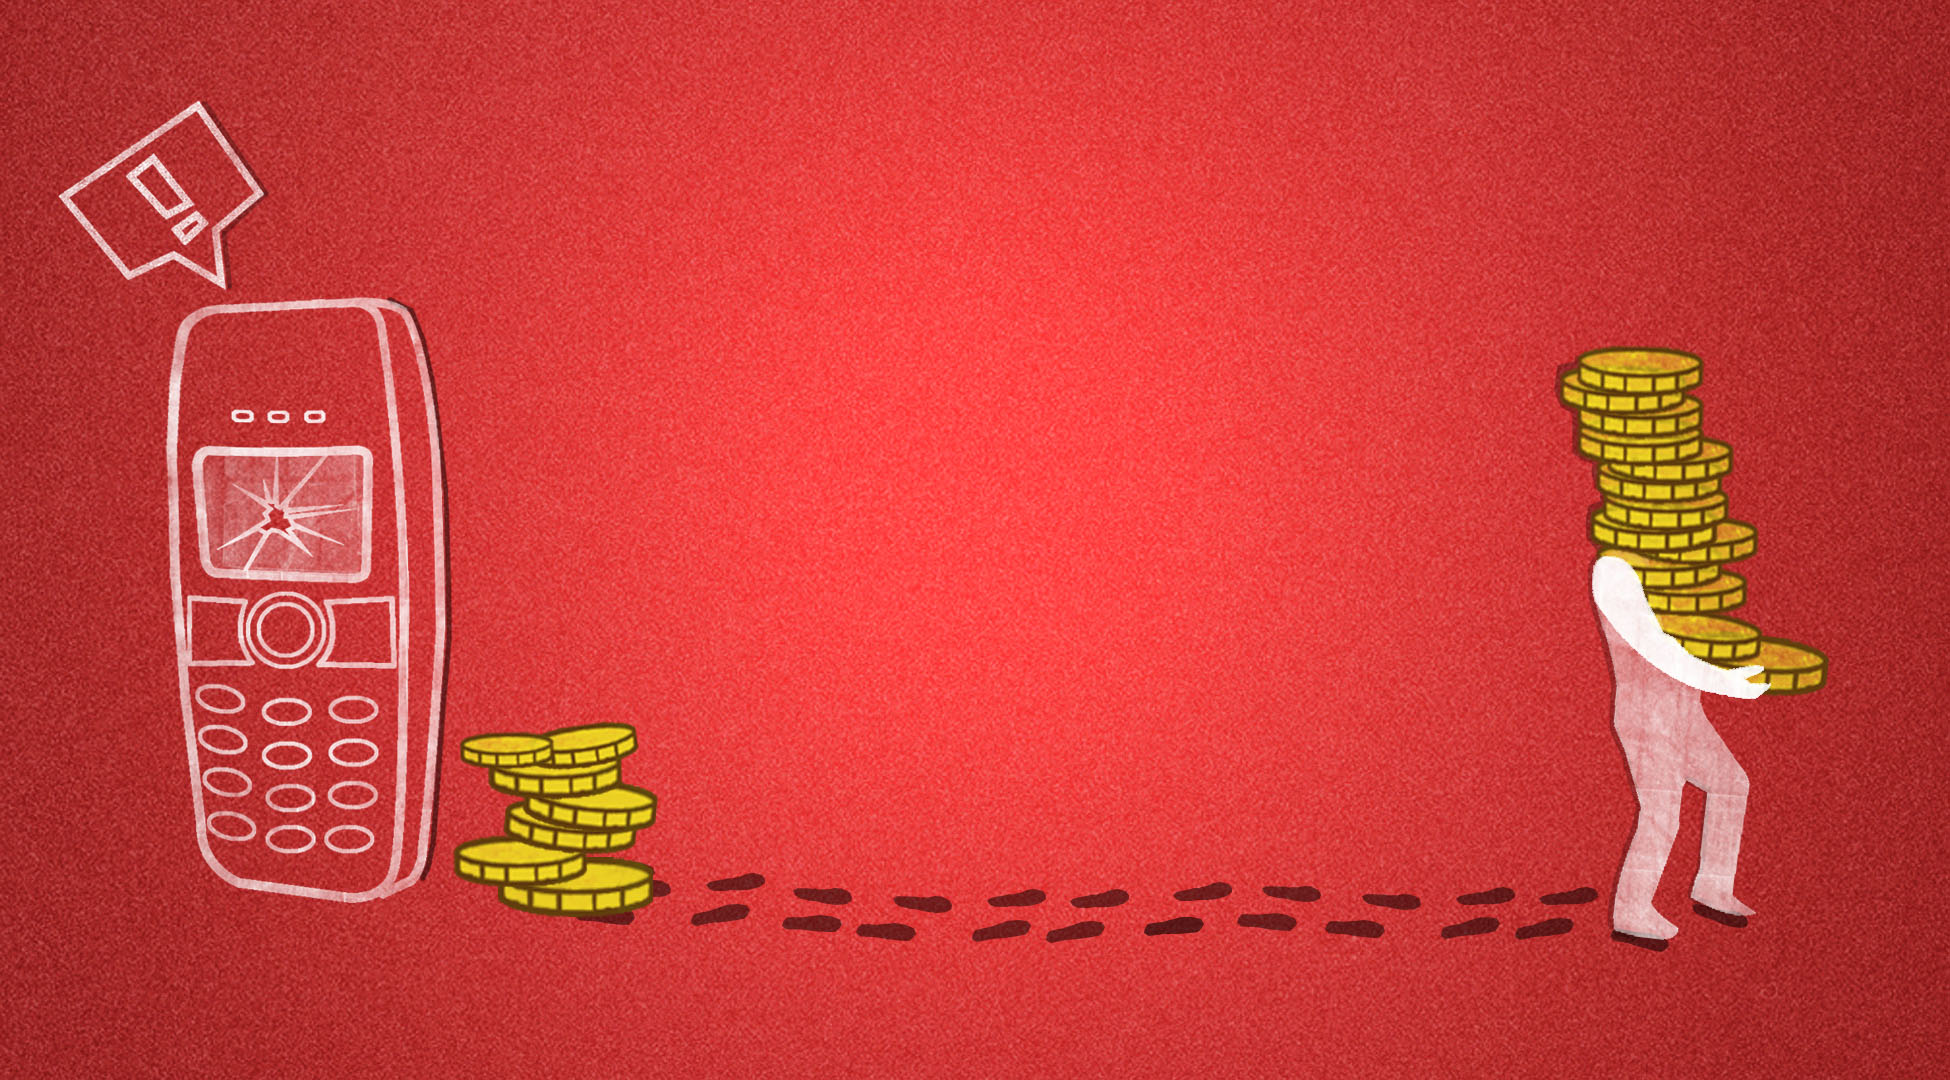 A graphic image with a red background. On the left we see an old mobile phone standing upright with its screen broken. There is an alert notification bubble to the left of it. Behind the phone is a tower of coins. Some footsteps trail from the coins and lead to the silhouette of a person carrying a stack of coins. 